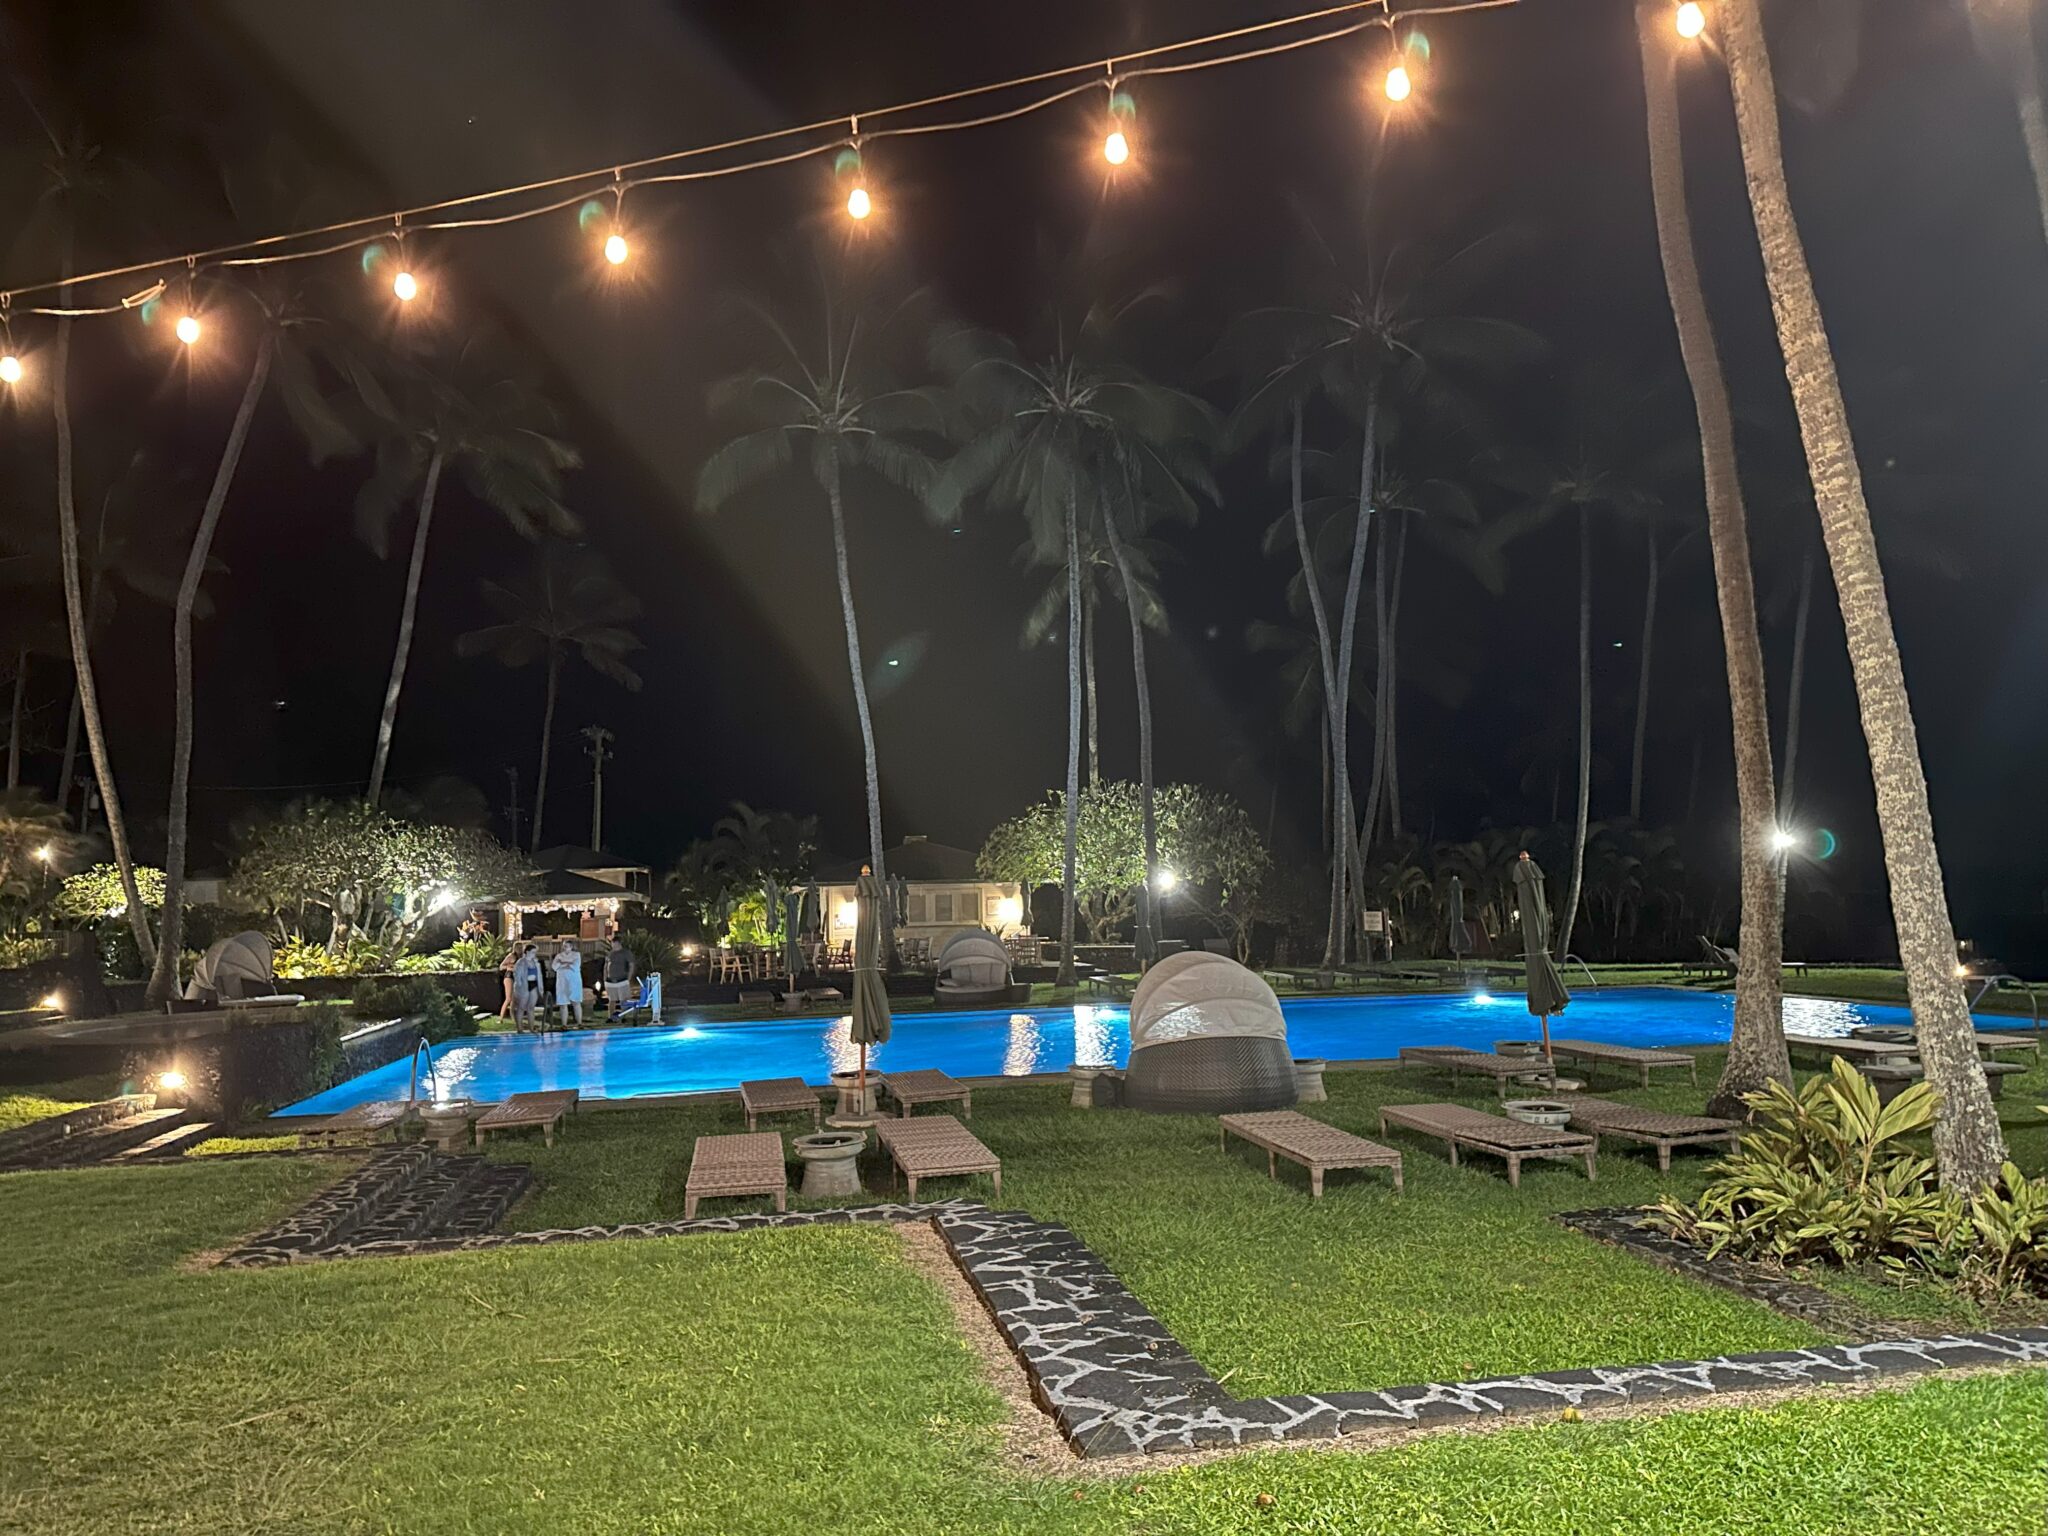 a pool with palm trees and a pool at night